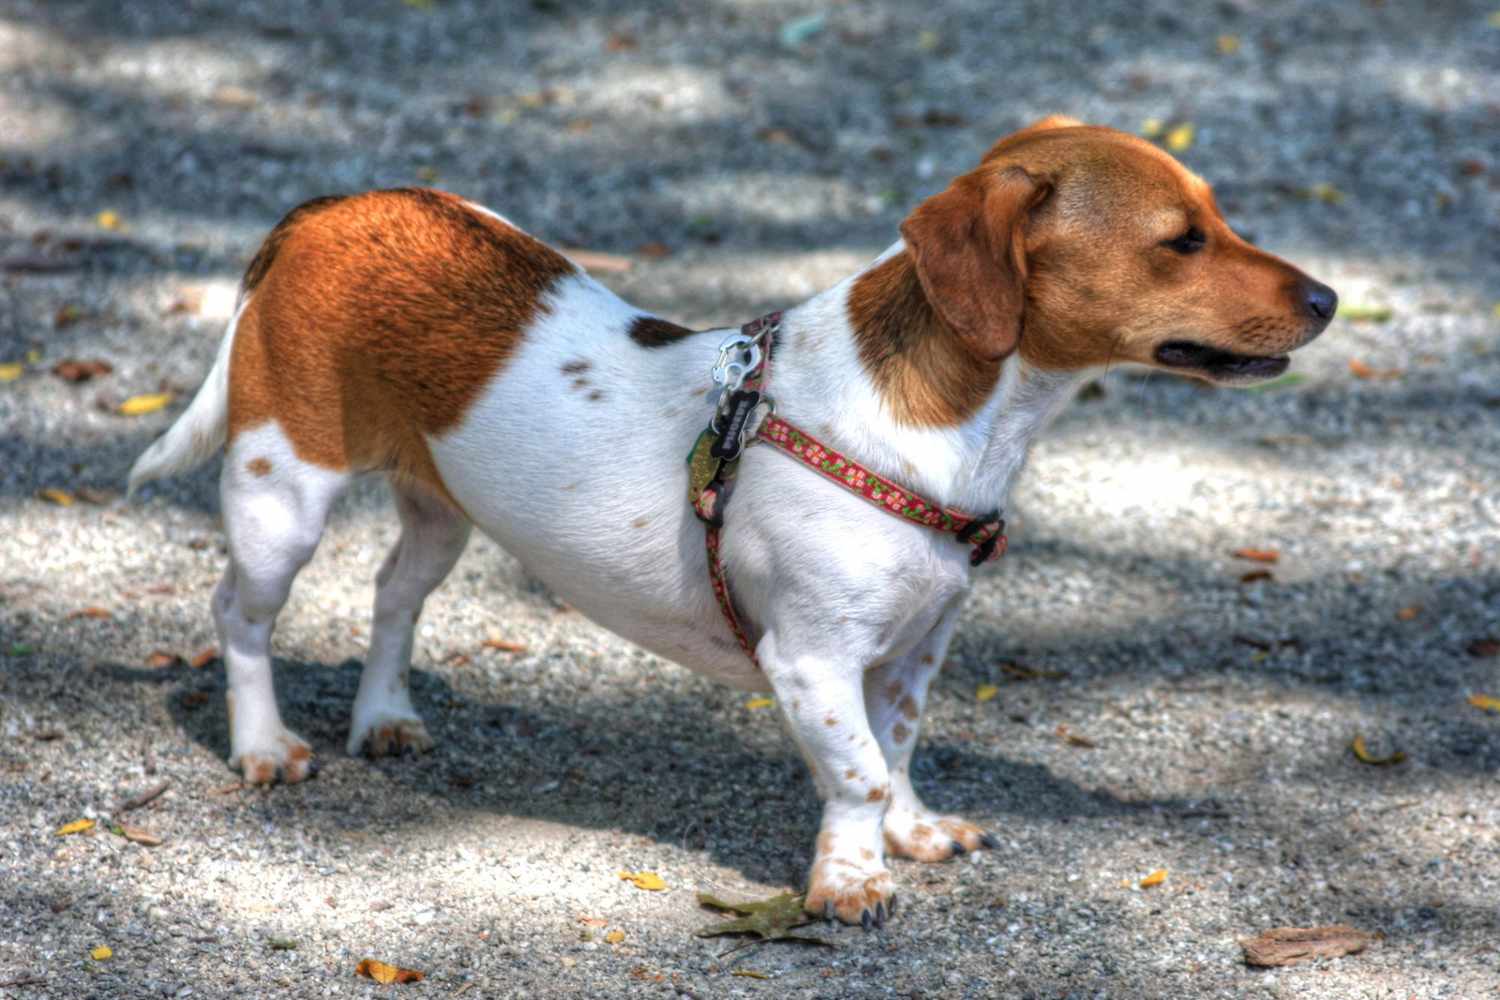 Orange and white chiweenie stands on gravel road with floral harness on